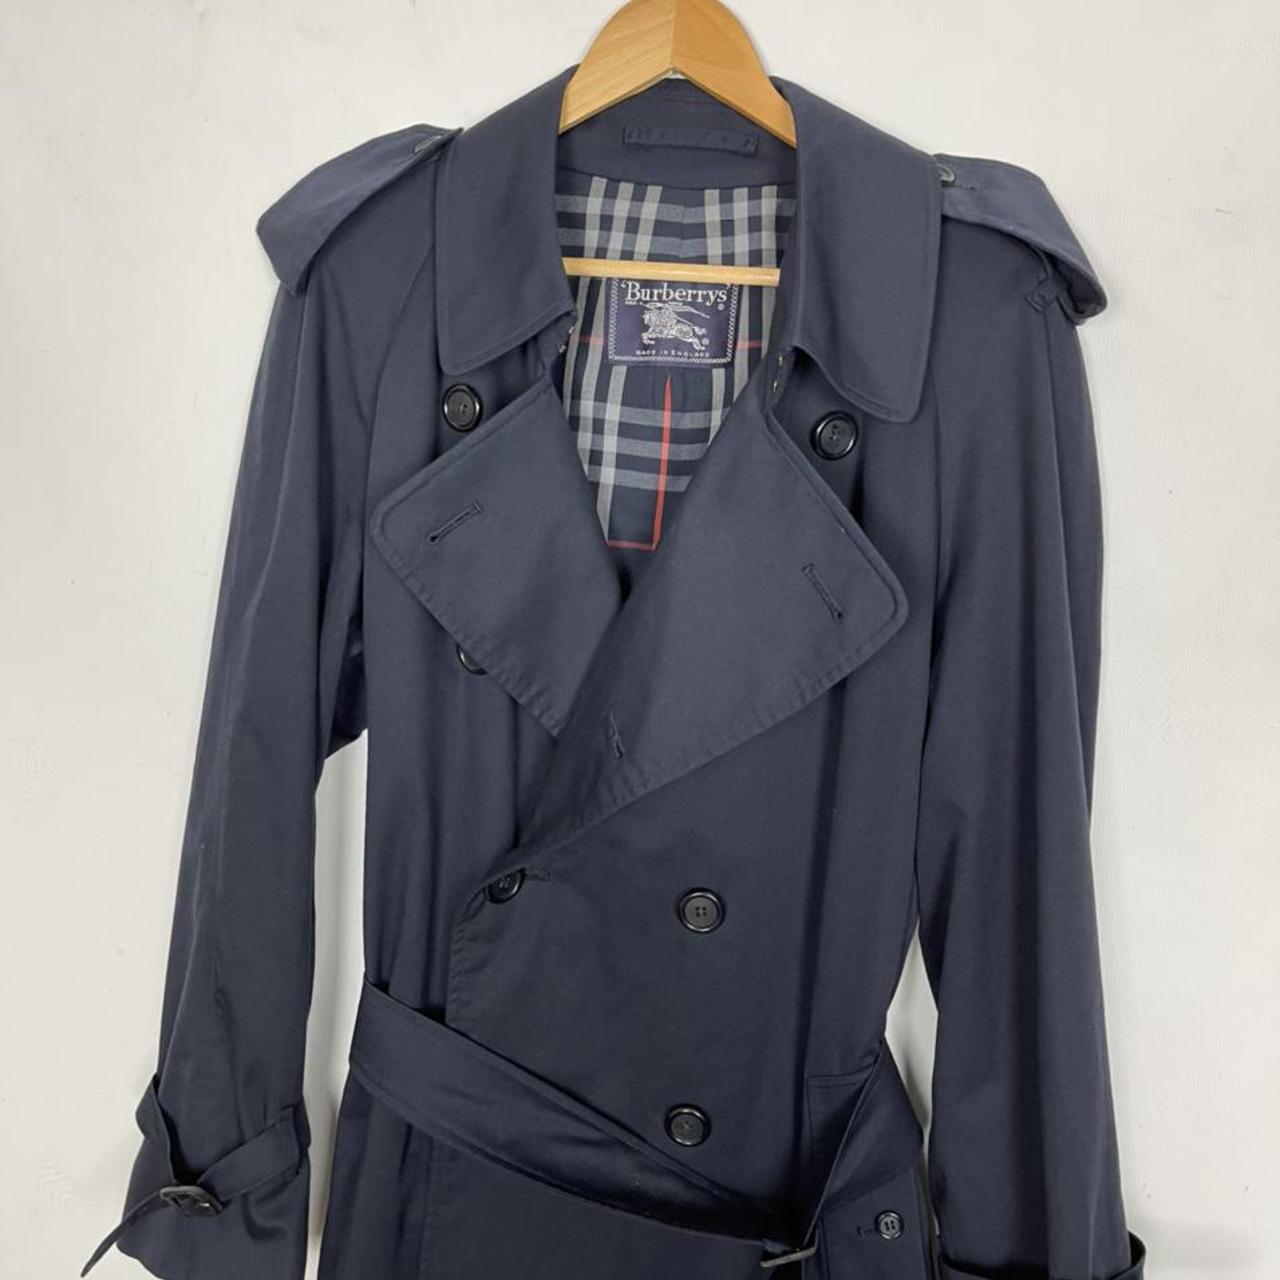 Vintage Burberry Trench Coat in navy blue with... - Depop